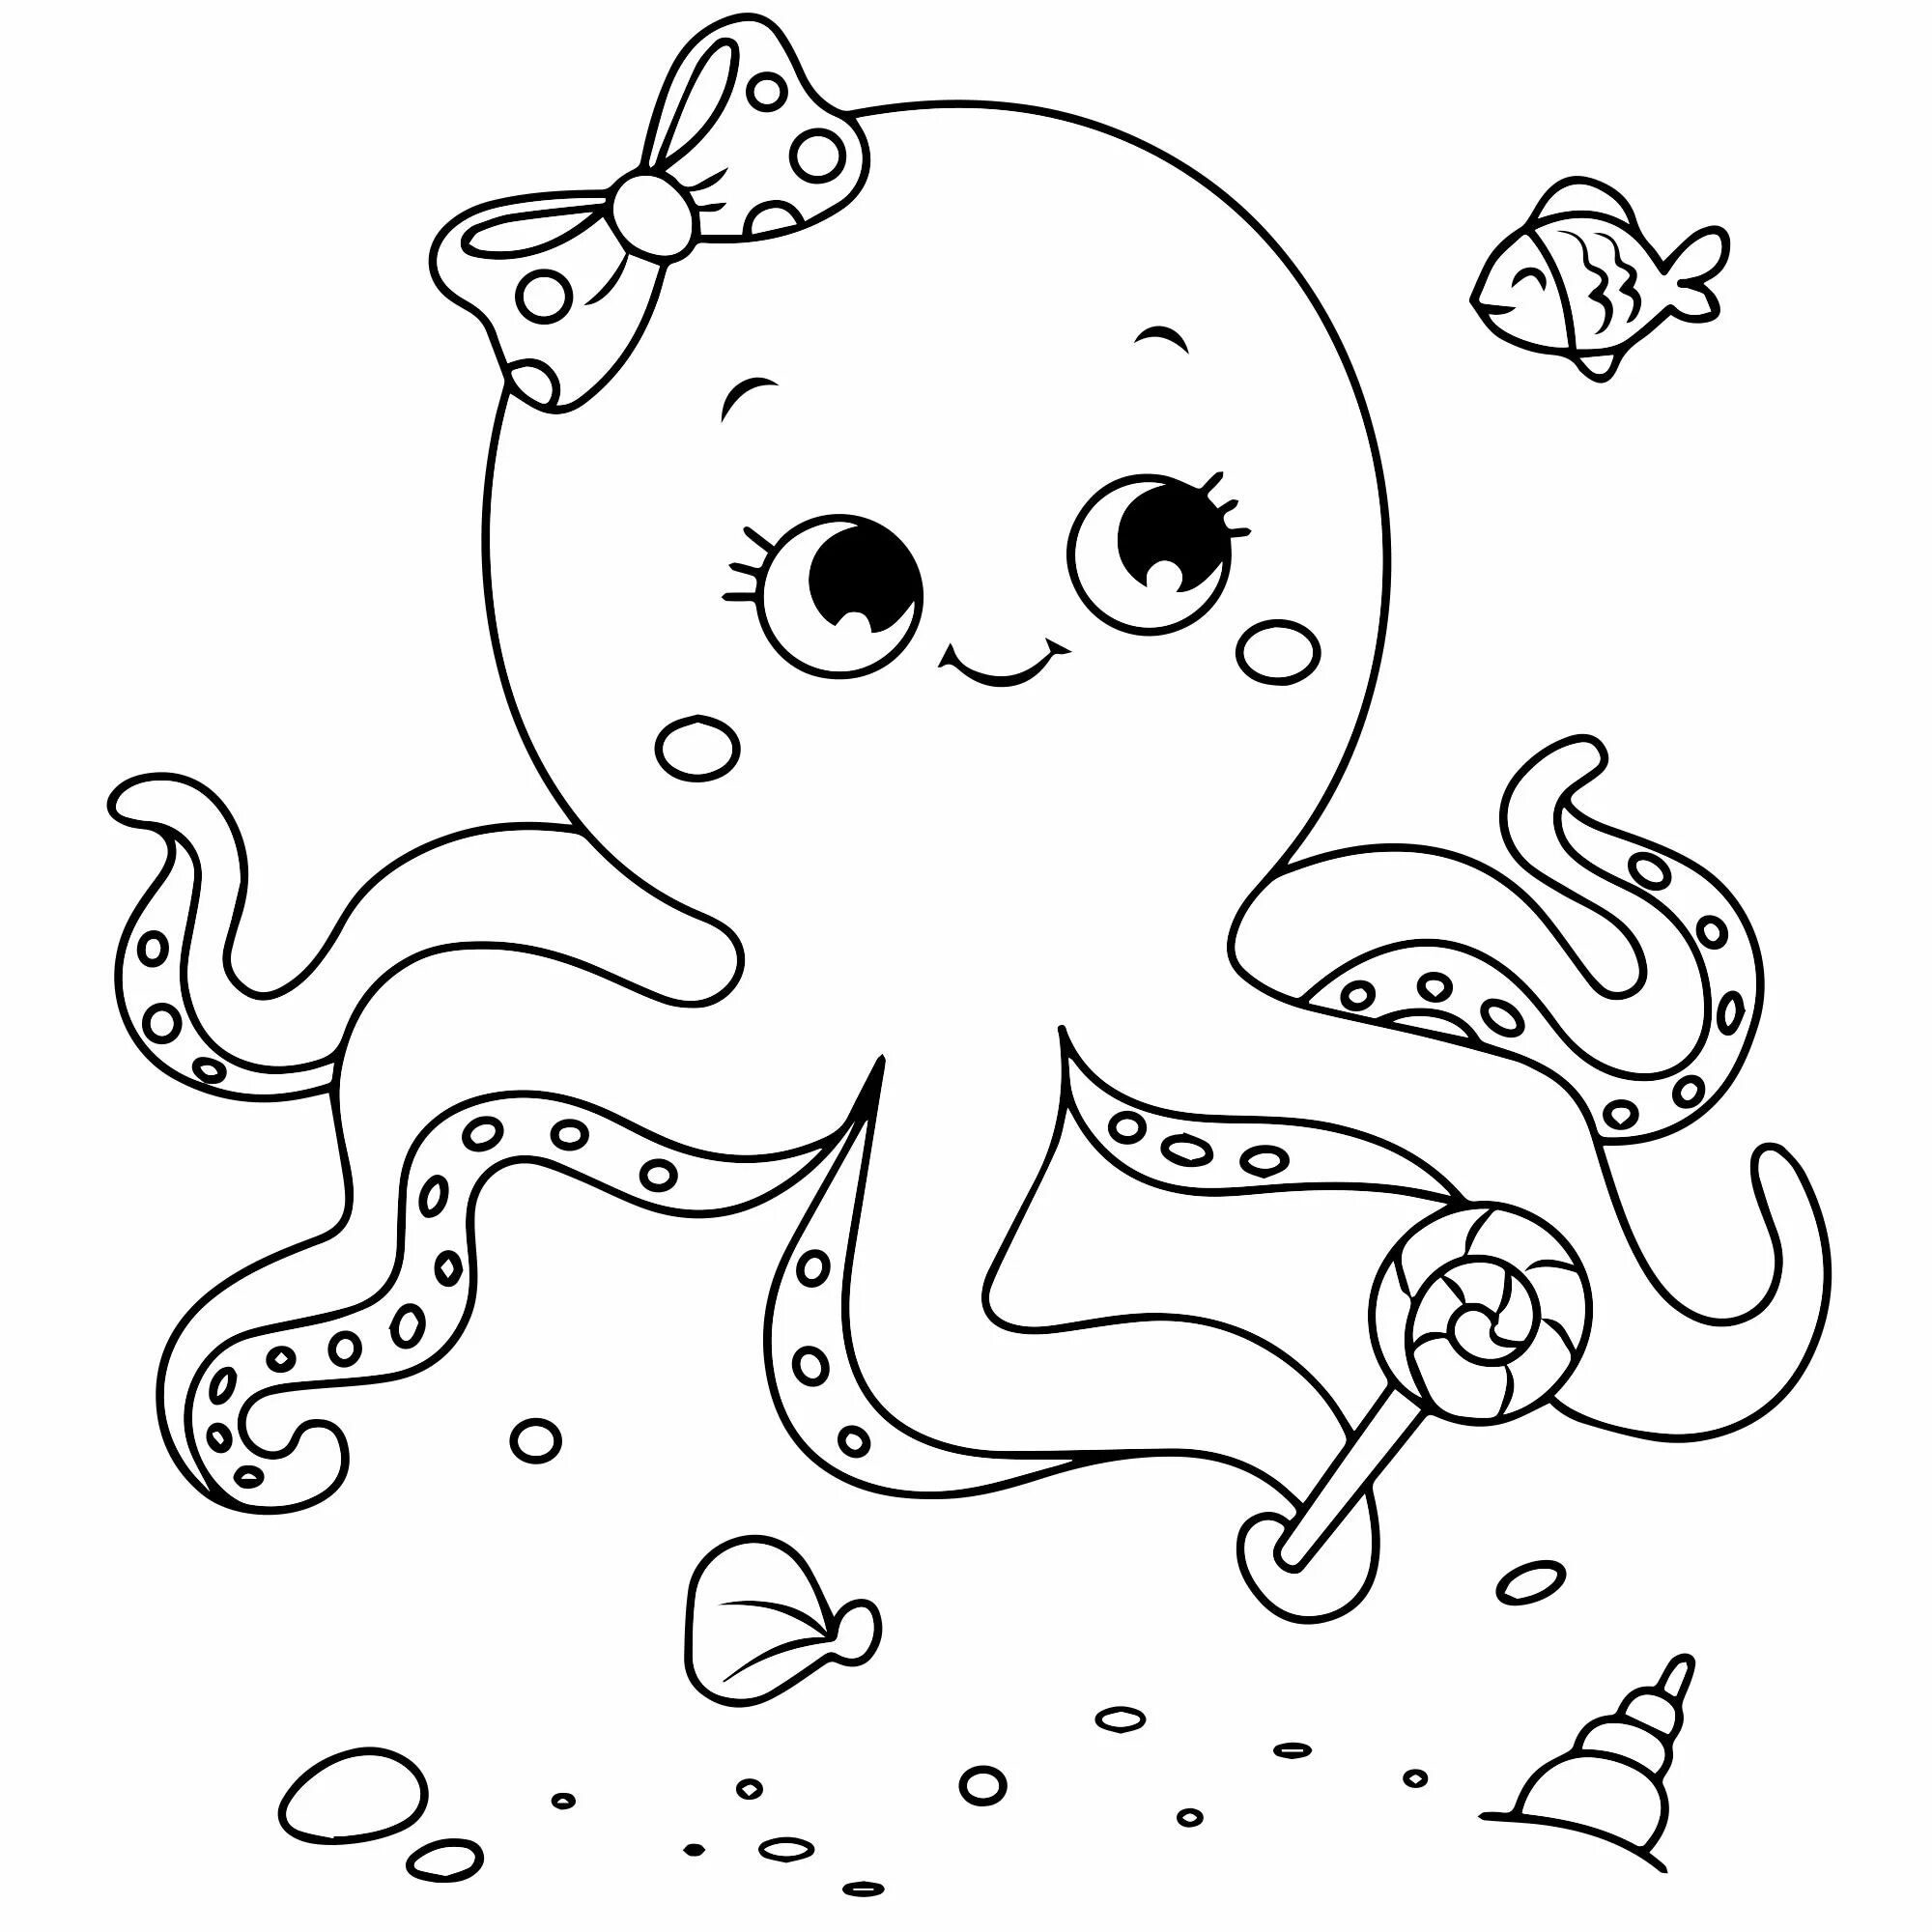 Dazzling octopus coloring pages for kids